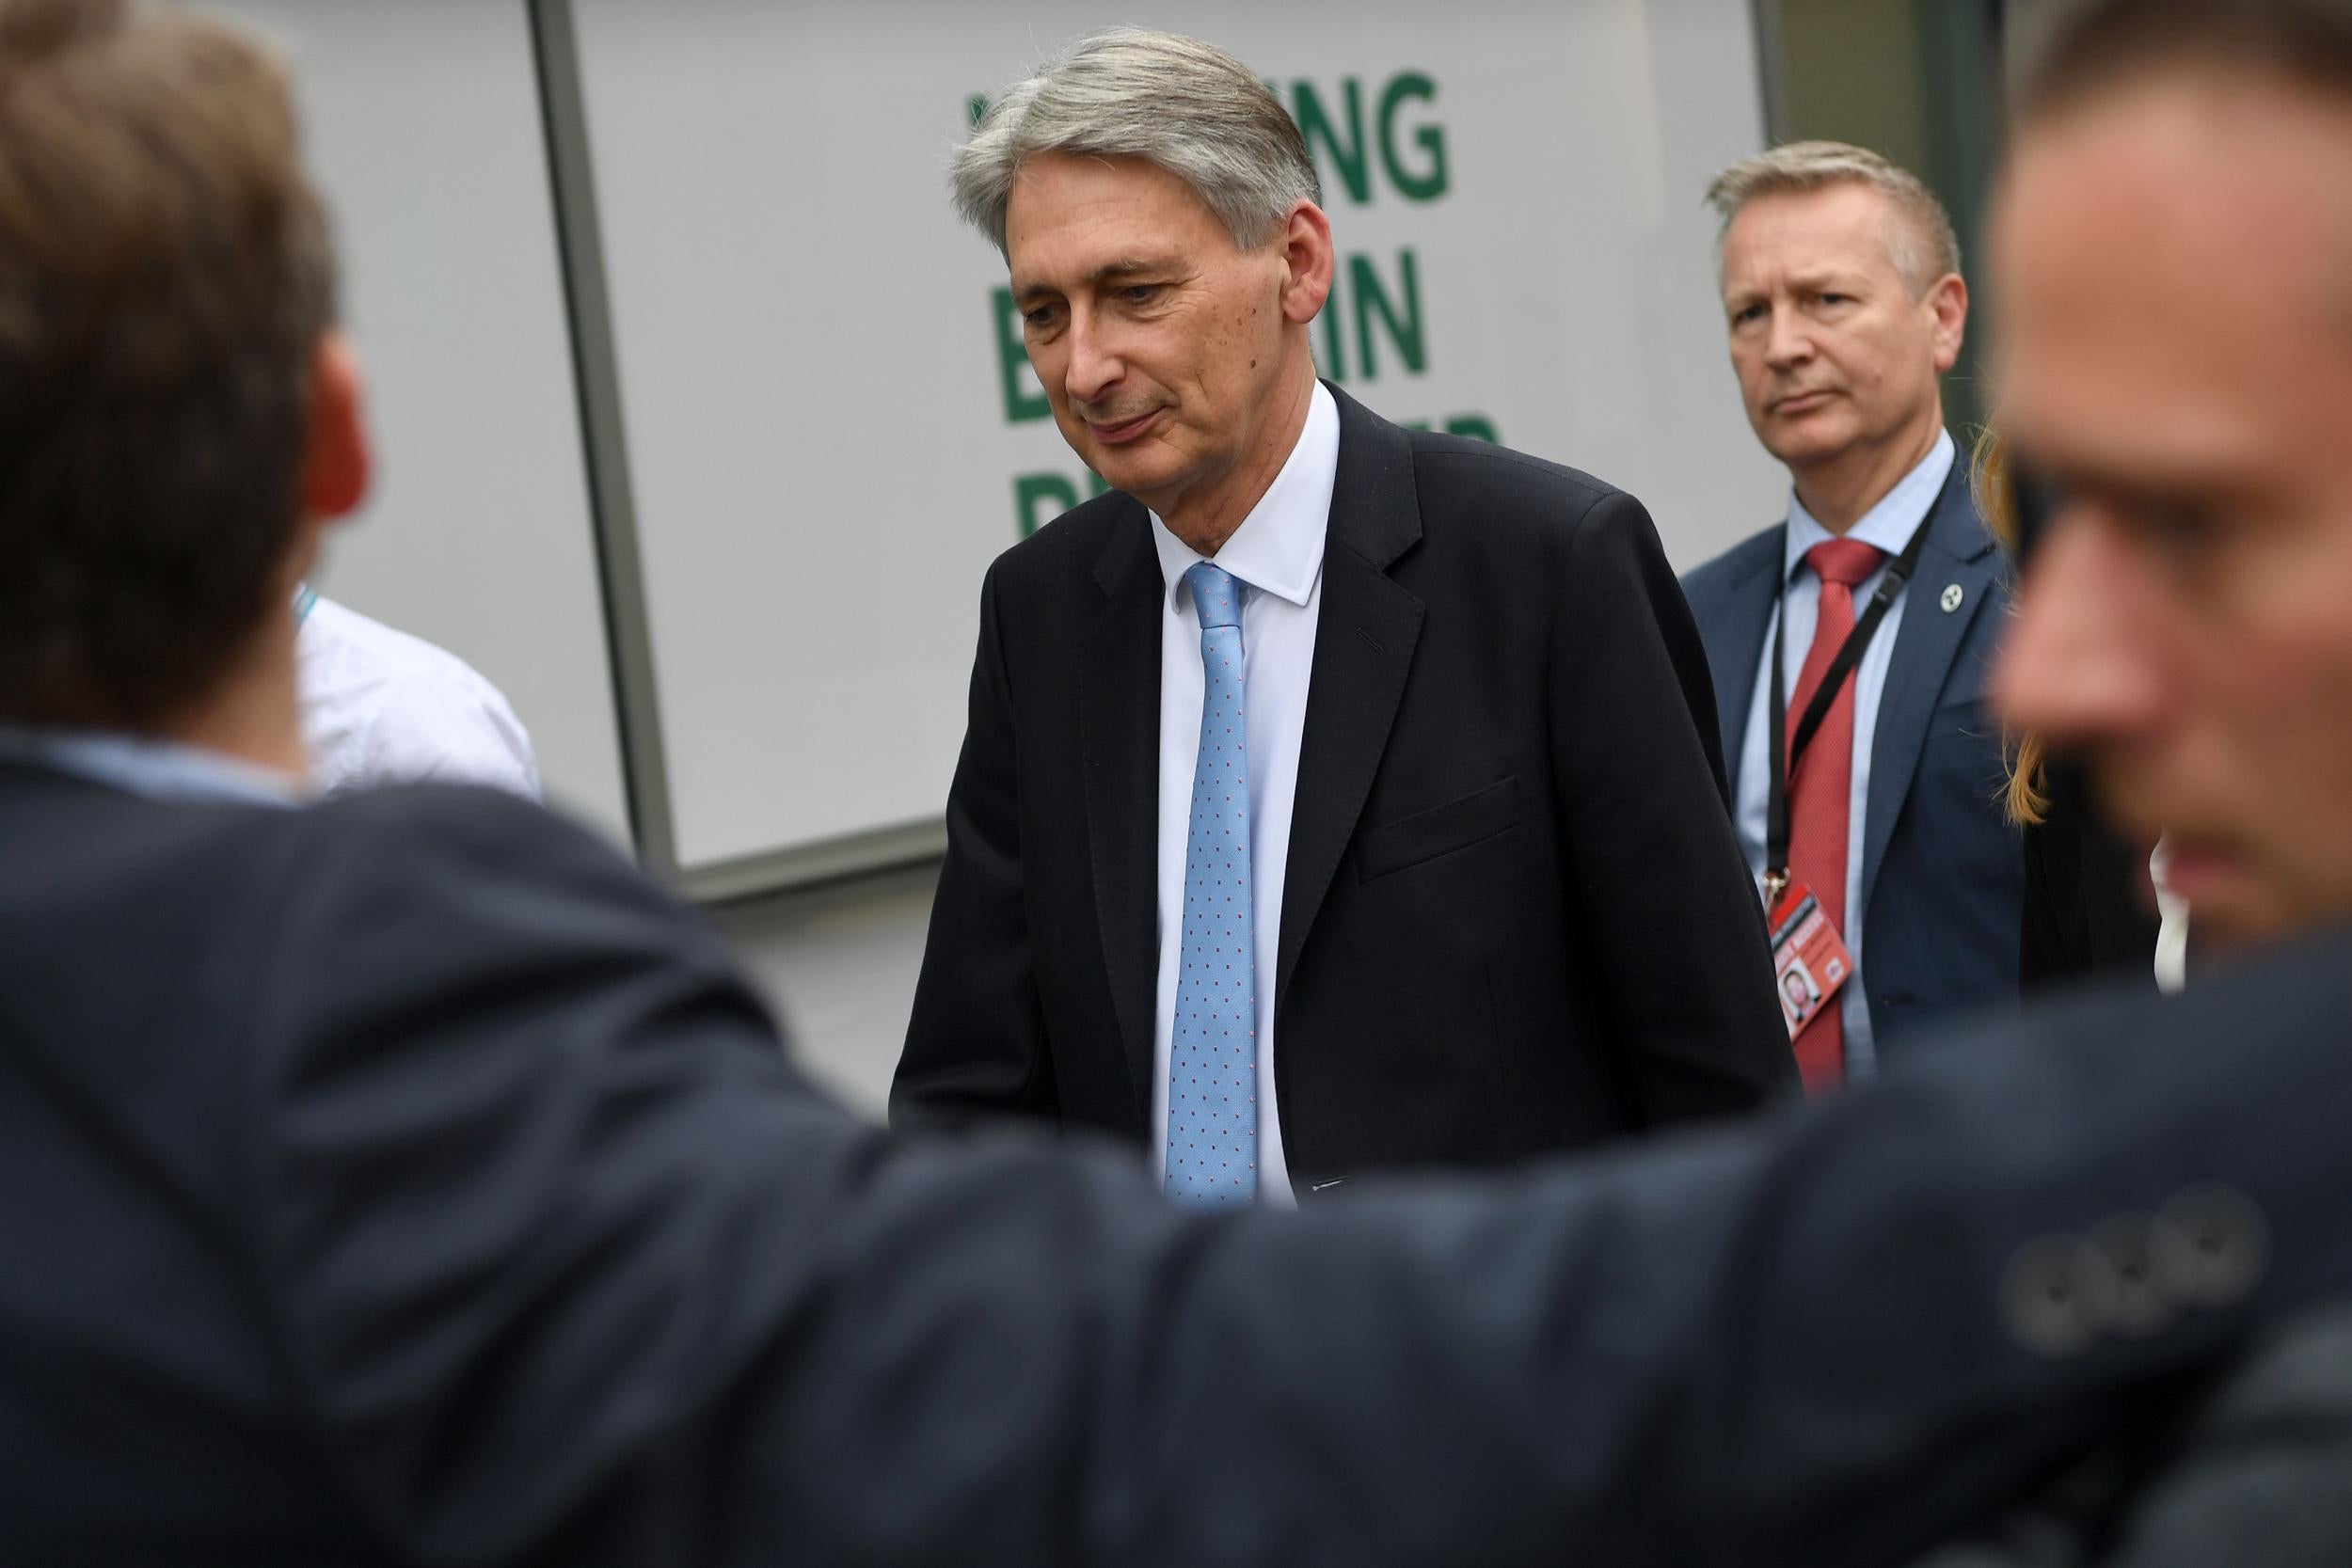 The Chancellor is likely to use the deterioration to argue the Government cannot give in to pressure to loosen spending restraint